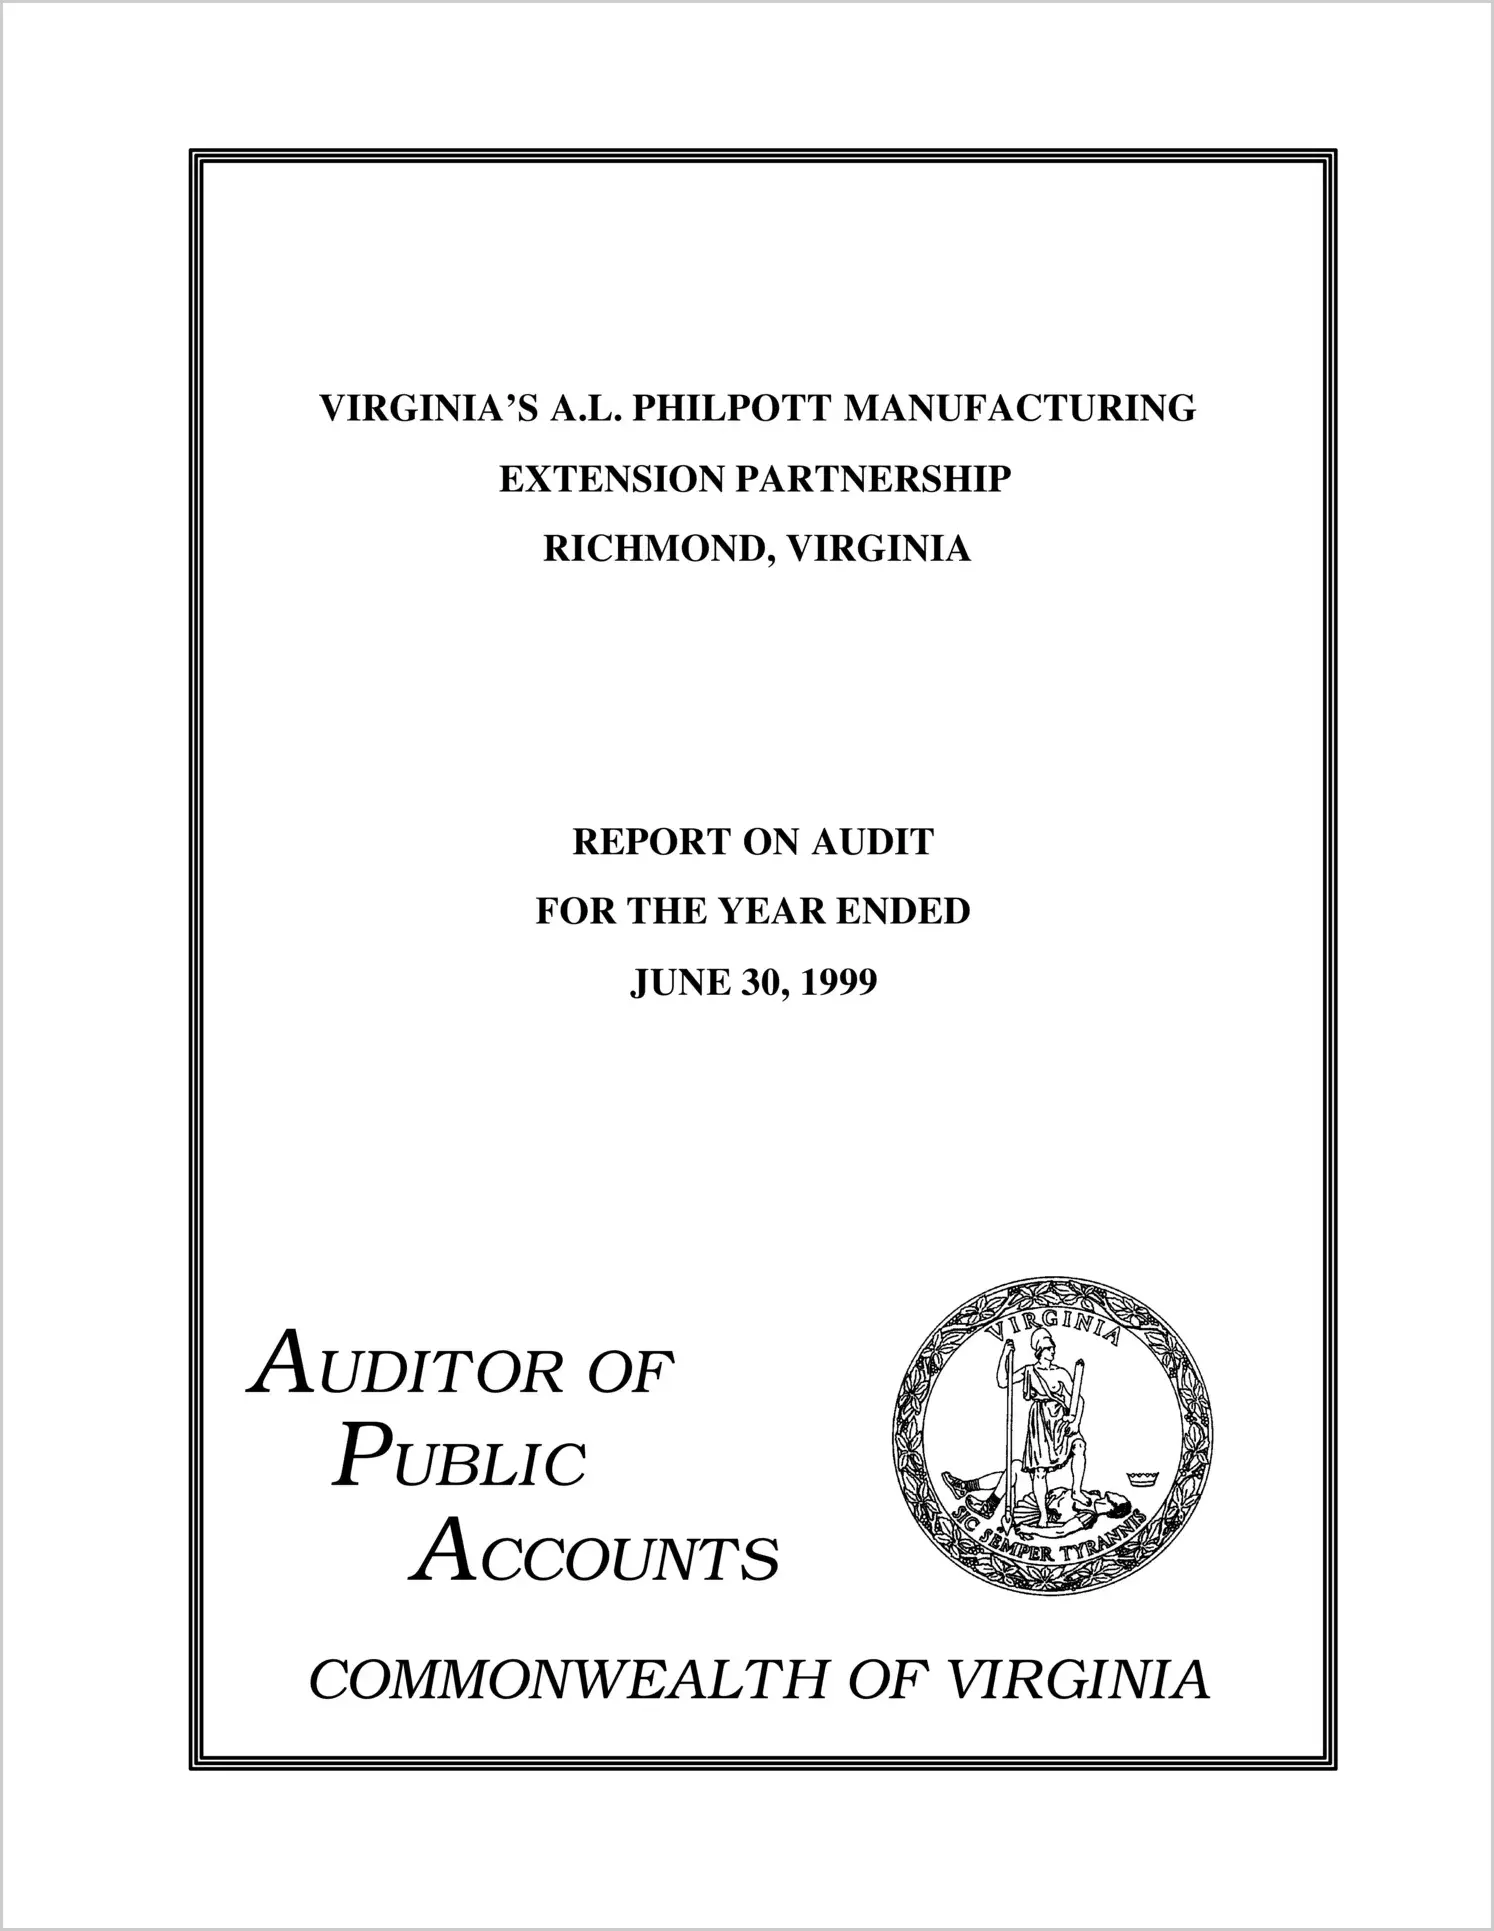 Virginia? A. L. Philpott Manufacturing Extension Partnership for the year ended June 30, 1999